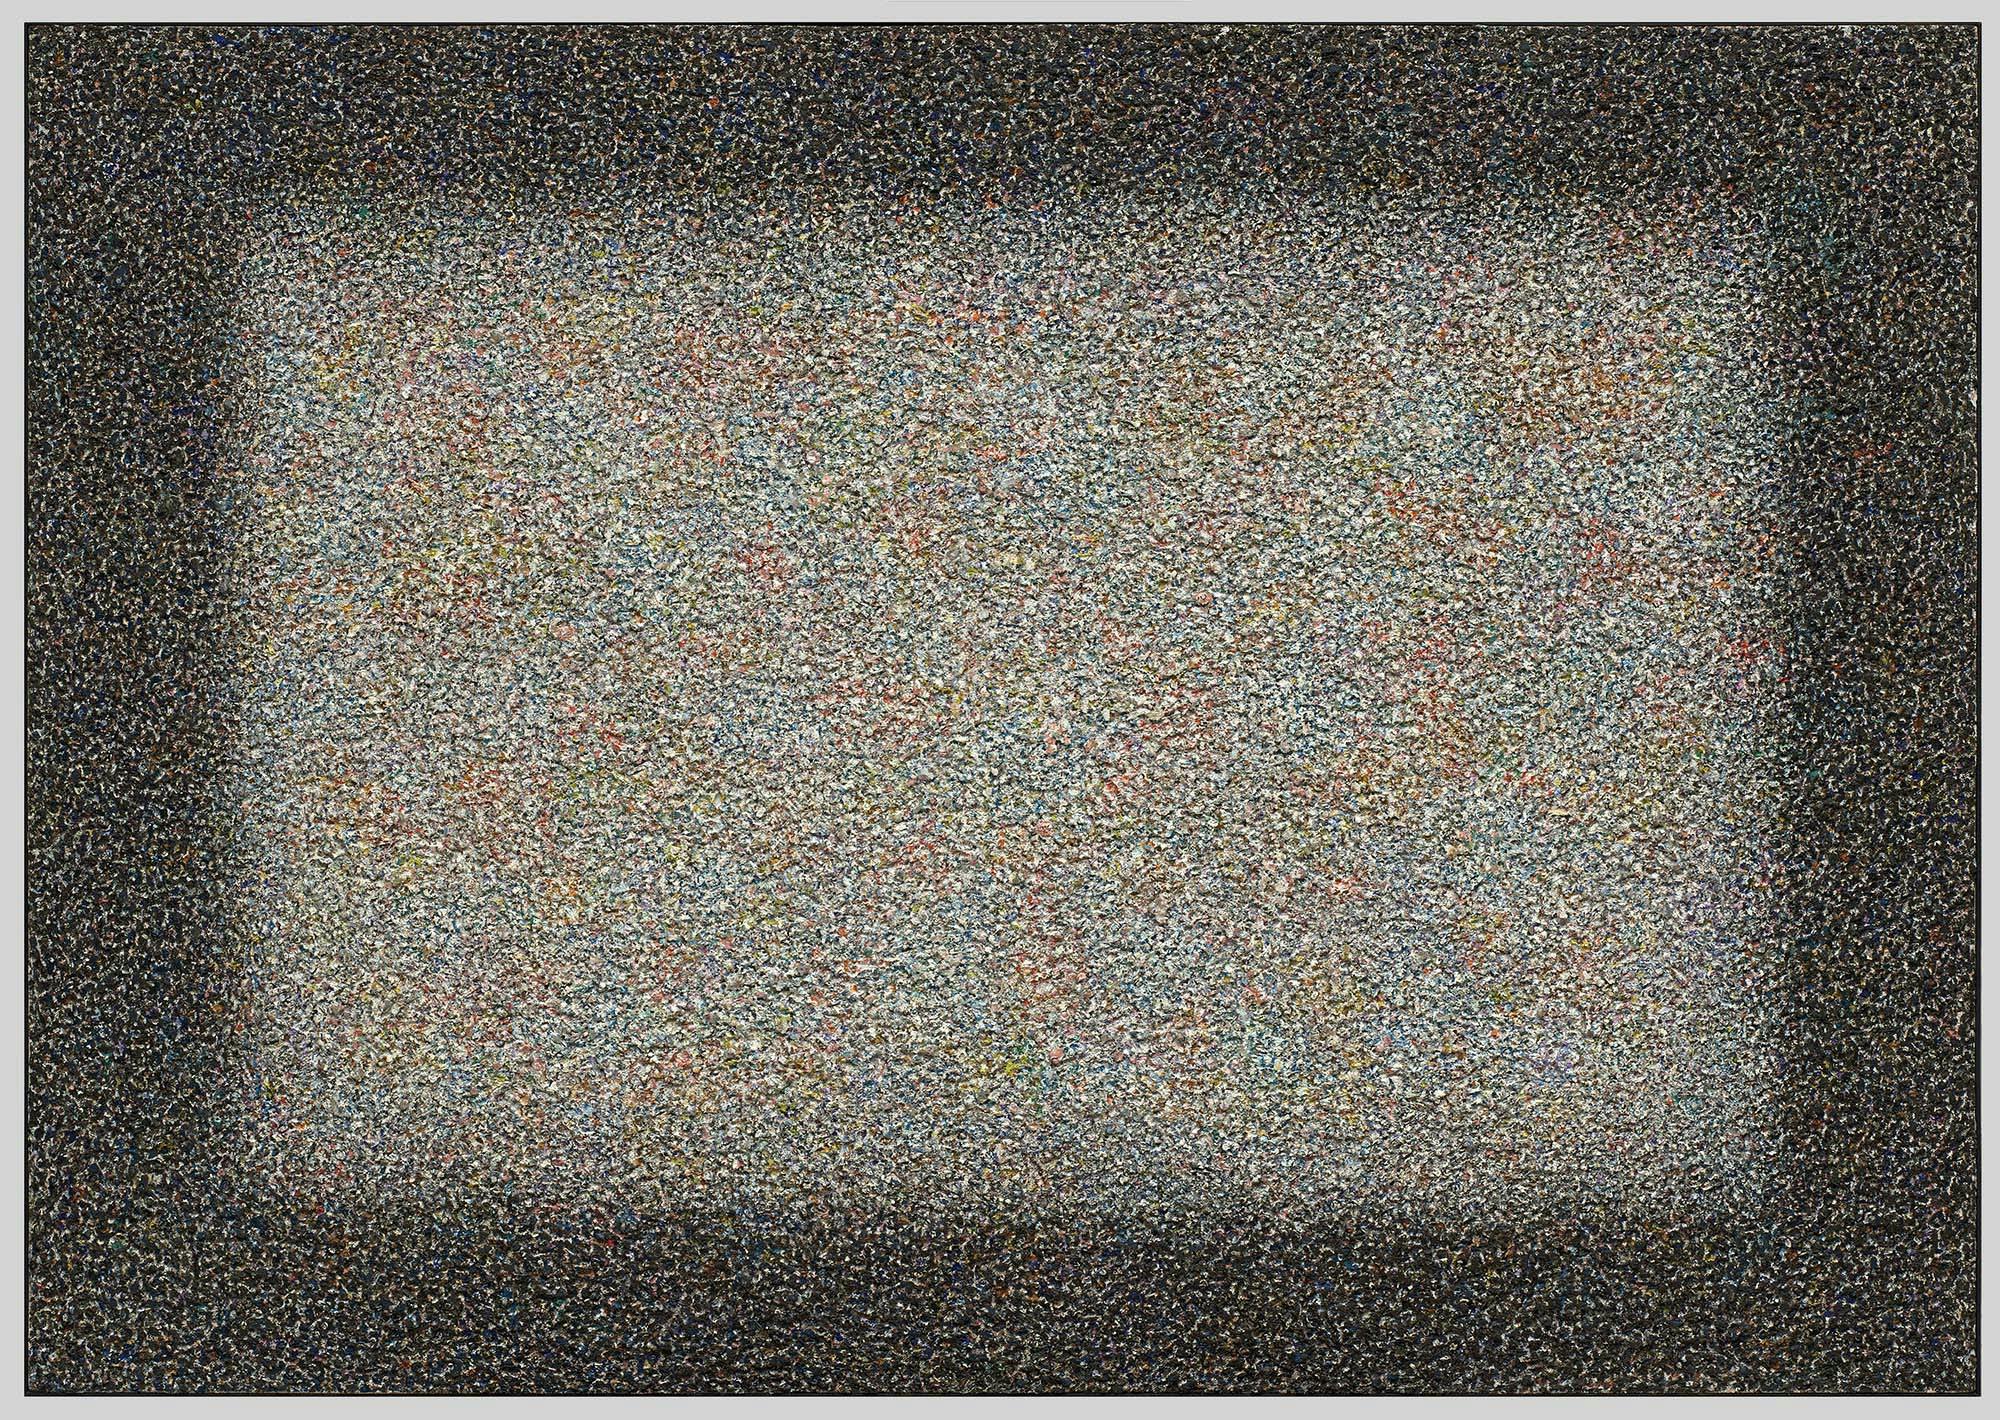 Window of Unknowing
1976
Oil on canvas
50 x 71 1/2 in. (127 x 181.6 cm)
The Cleveland Museum of Art, Ohio, Gift of the Linden Trust
 – The Richard Pousette-Dart Foundation